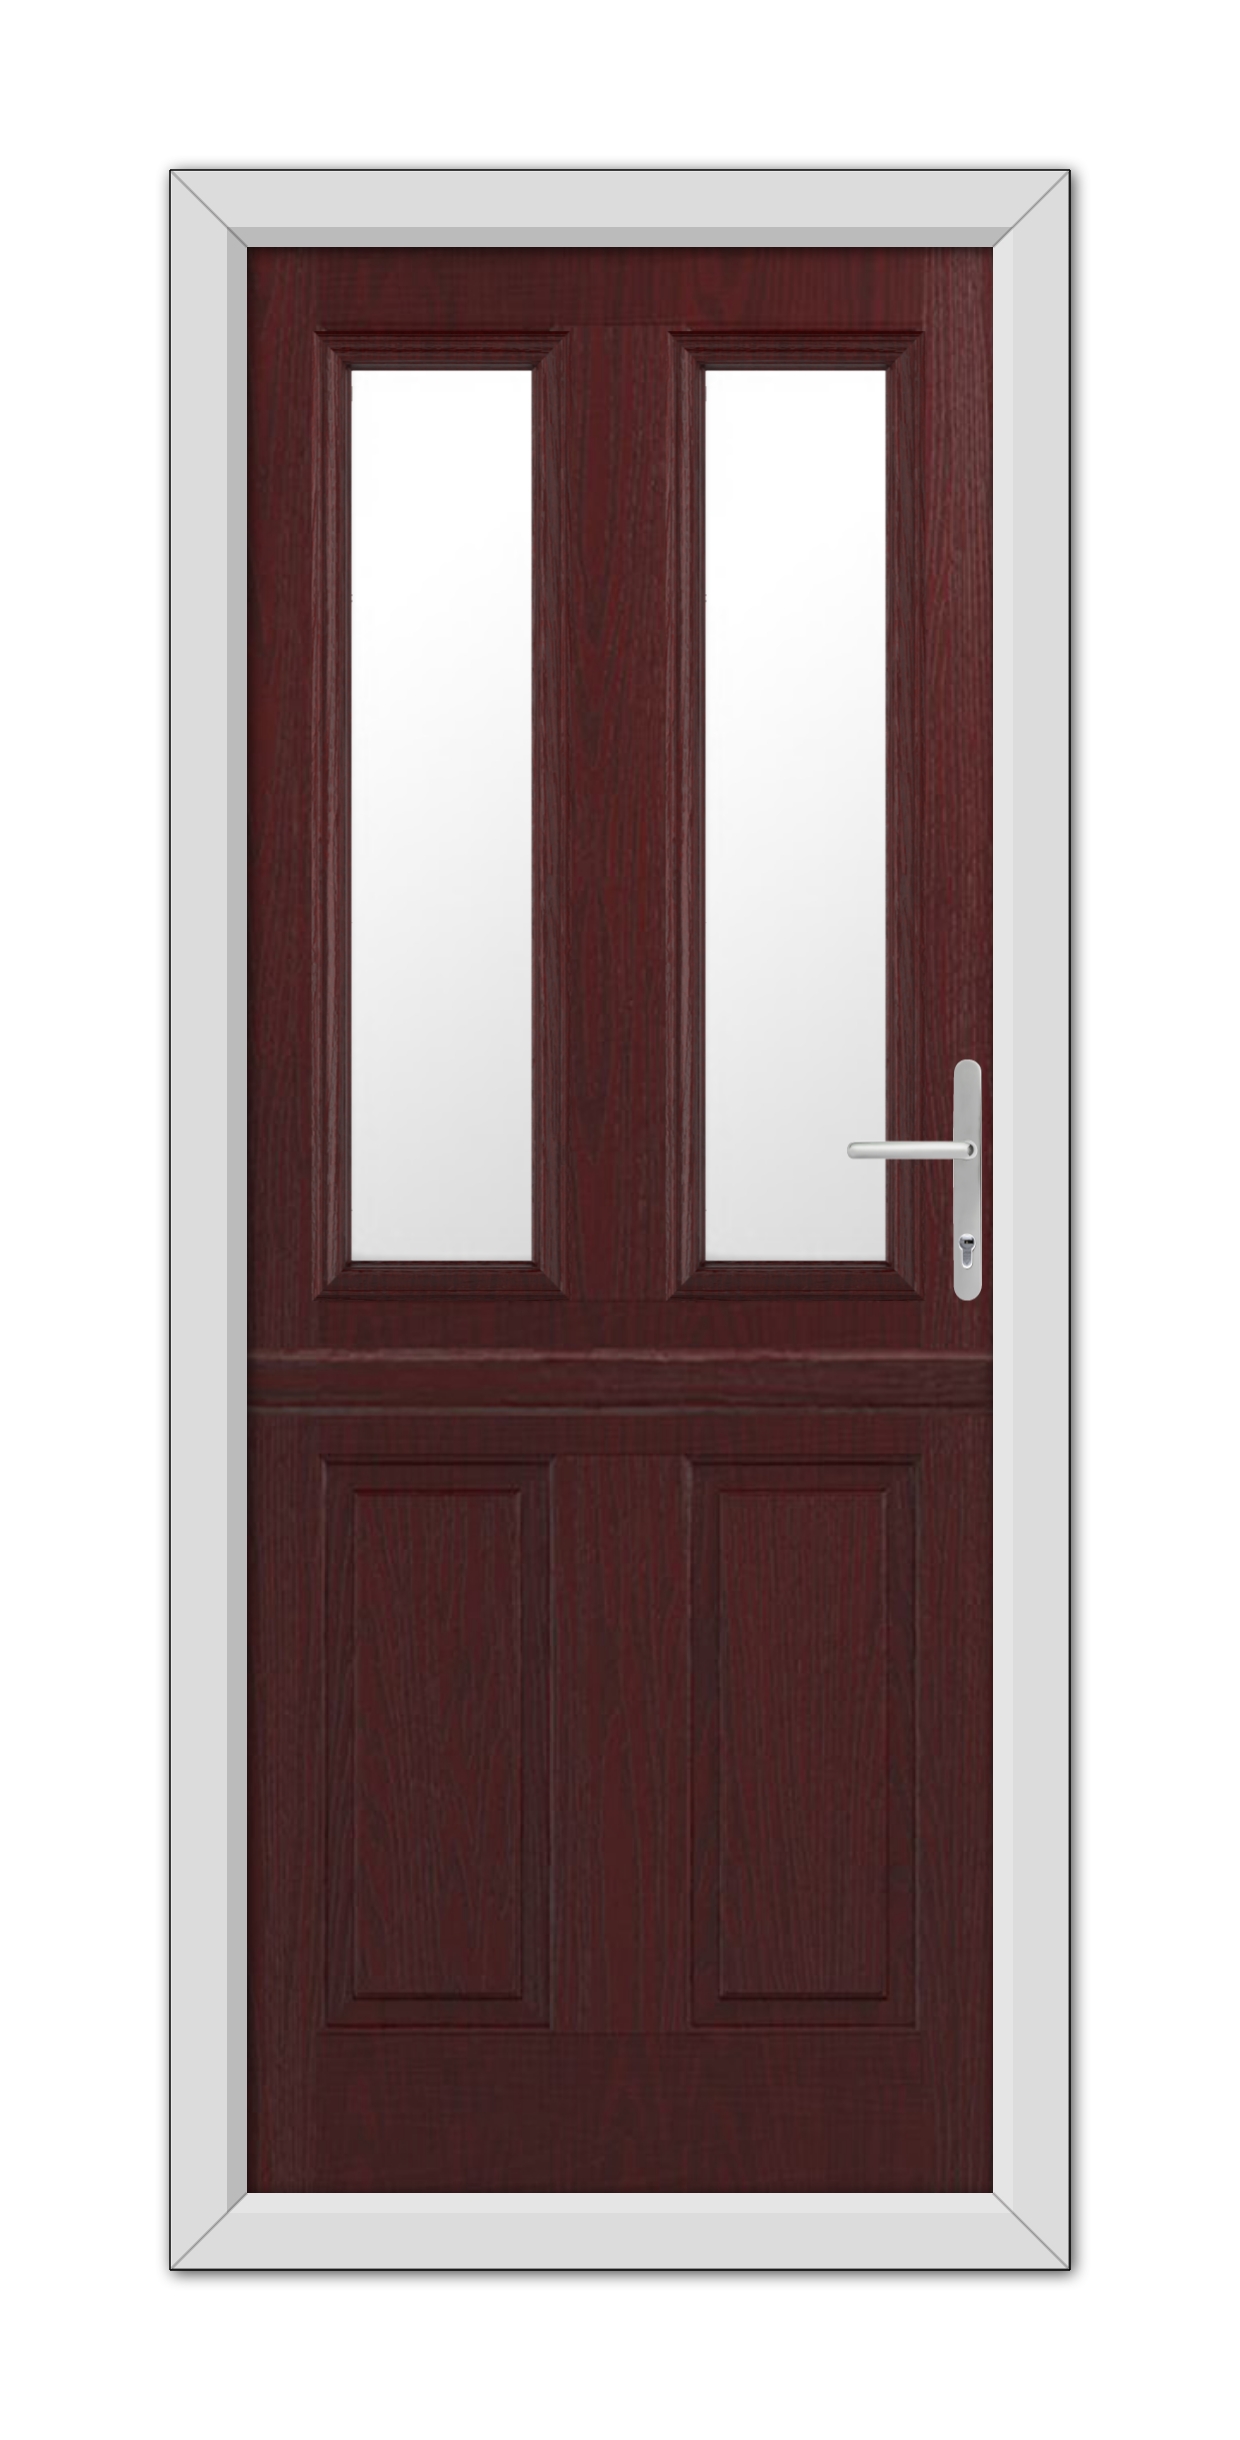 A Rosewood Whitmore Stable Composite Door 48mm Timber Core with two glass panels, framed in white, featuring a silver handle on the right side.